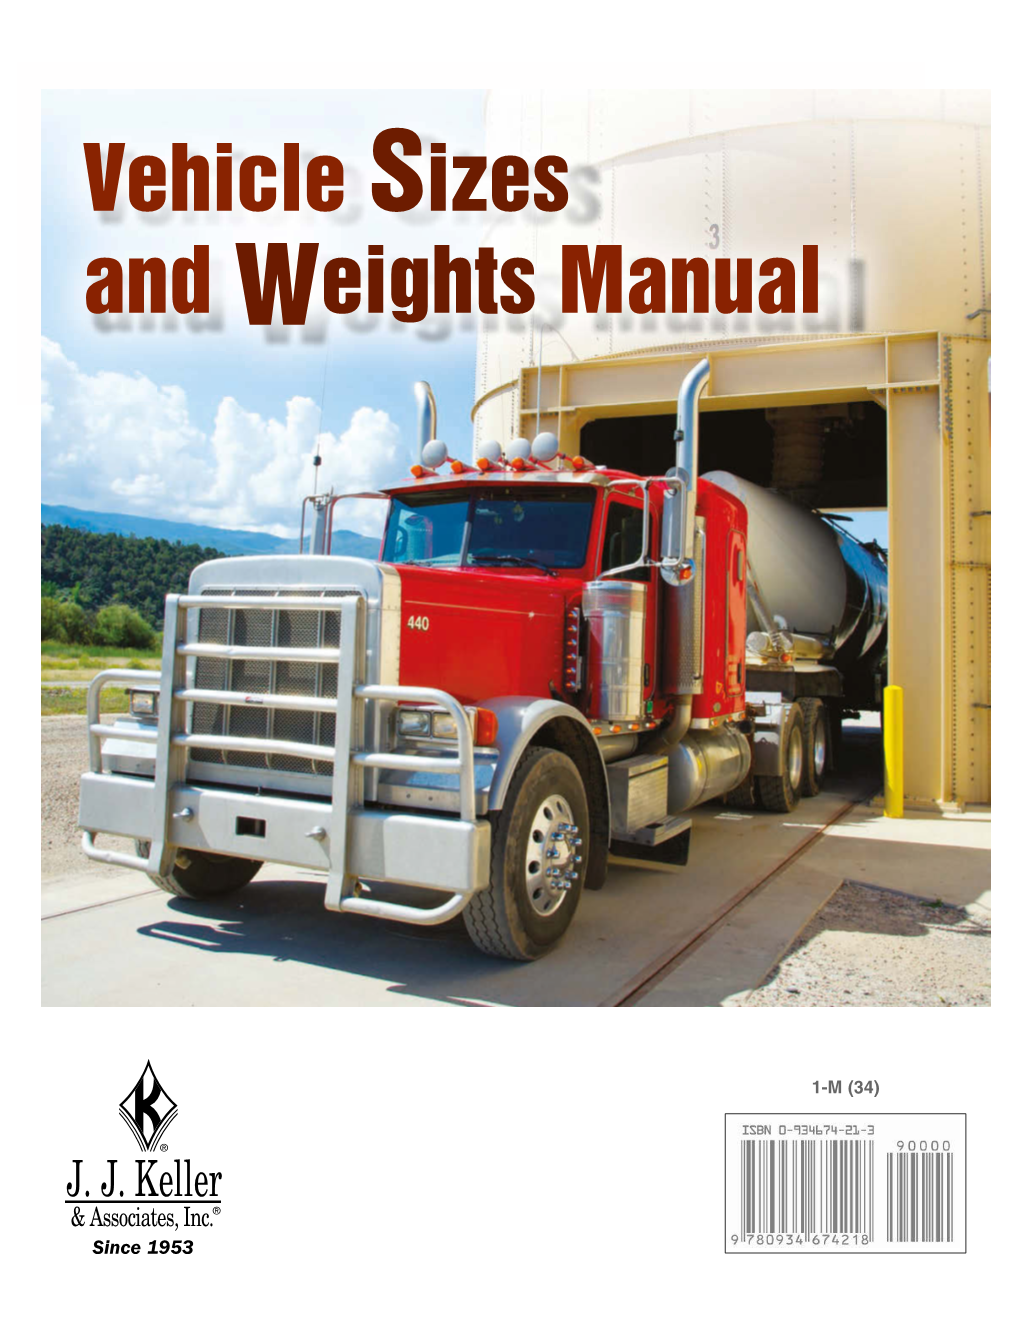 Vehicle Sizes and Weights Manual VEHICLE SIZES & WEIGHTS MANUAL